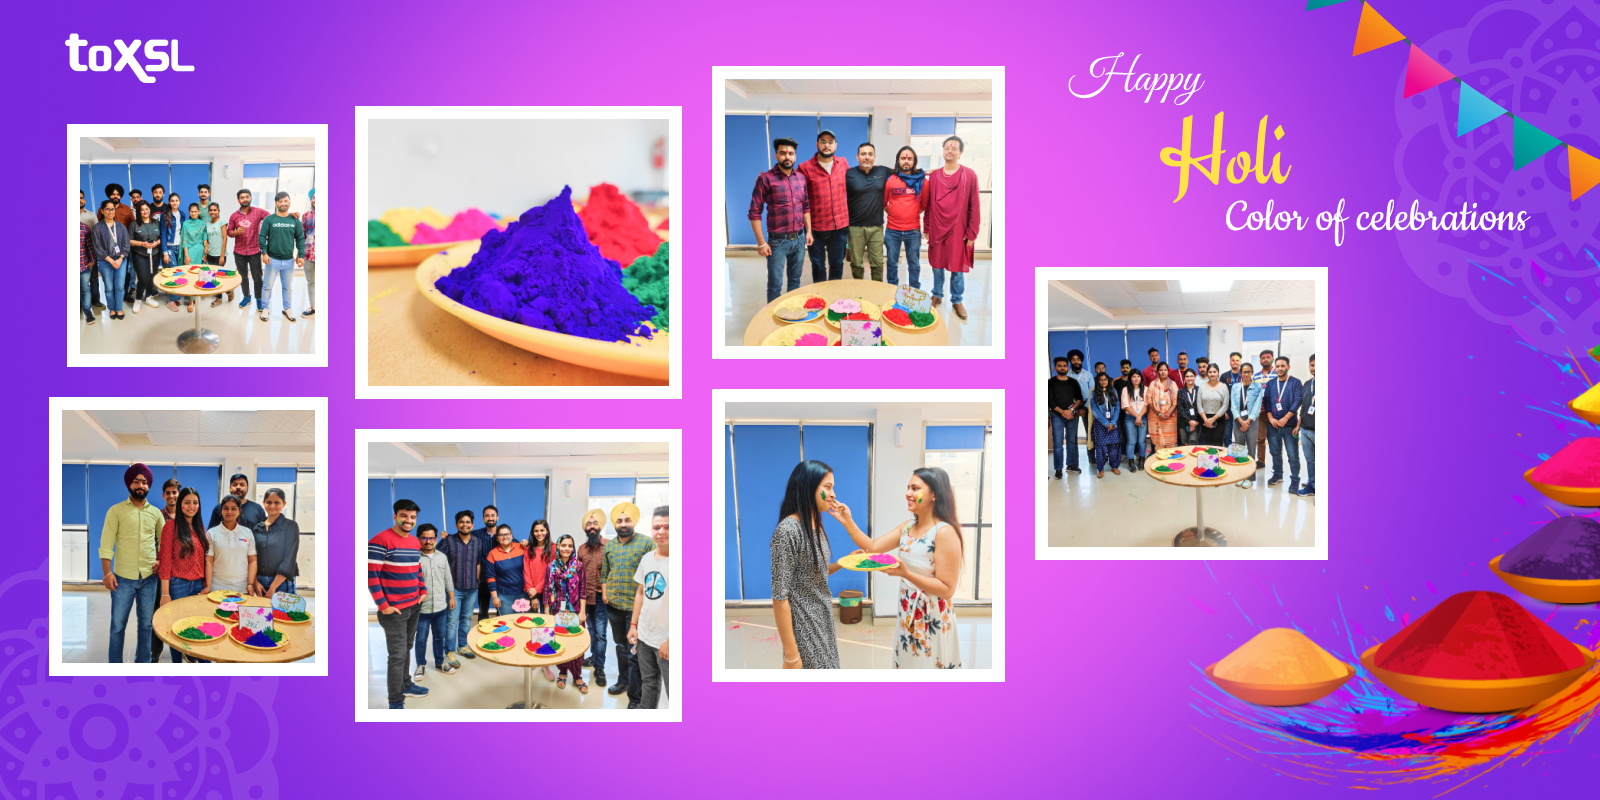 Holi hai! ToXSL Welcomed The Season Of Spring With Vibrant Colors